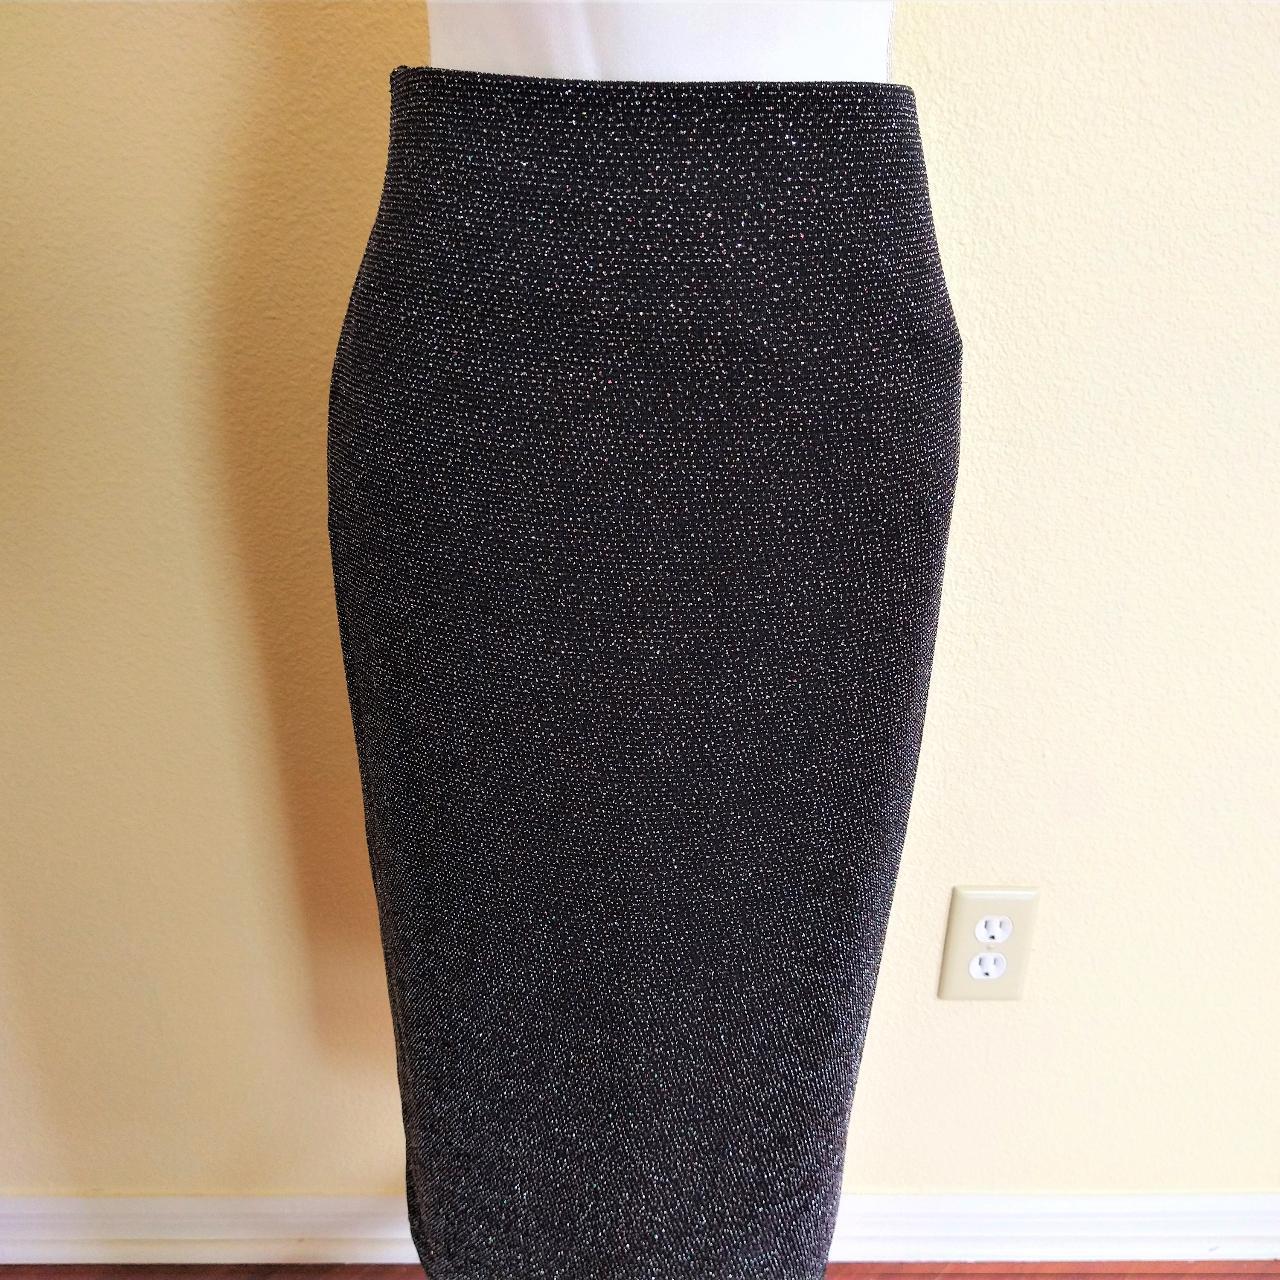 Product Image 2 - Black and Silver Glitter Skirt

Brand